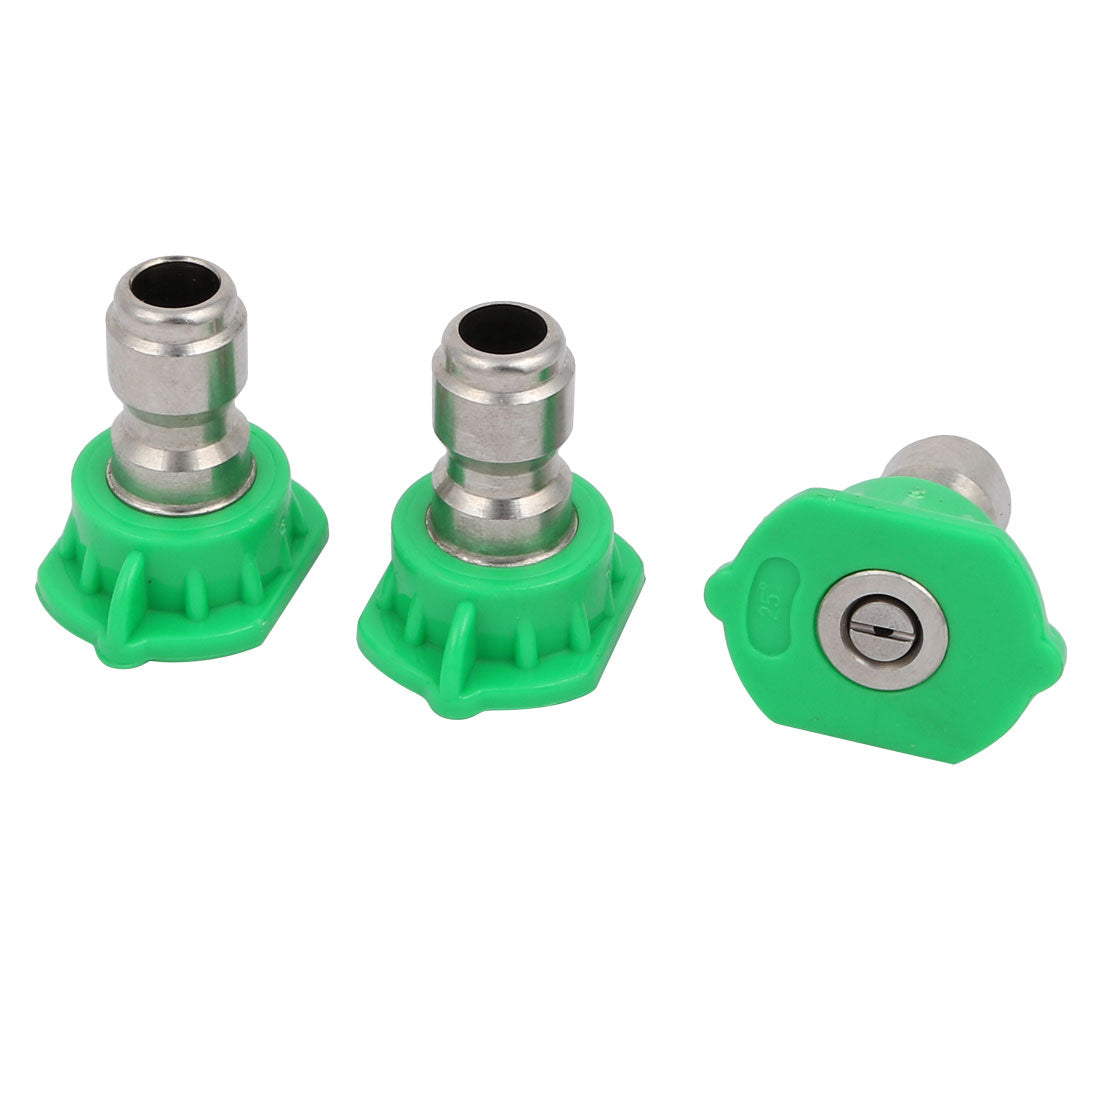 uxcell Uxcell 1mm Dia 25 Degree  Nozzle Universal Pressure  Accessories Green 3pcs